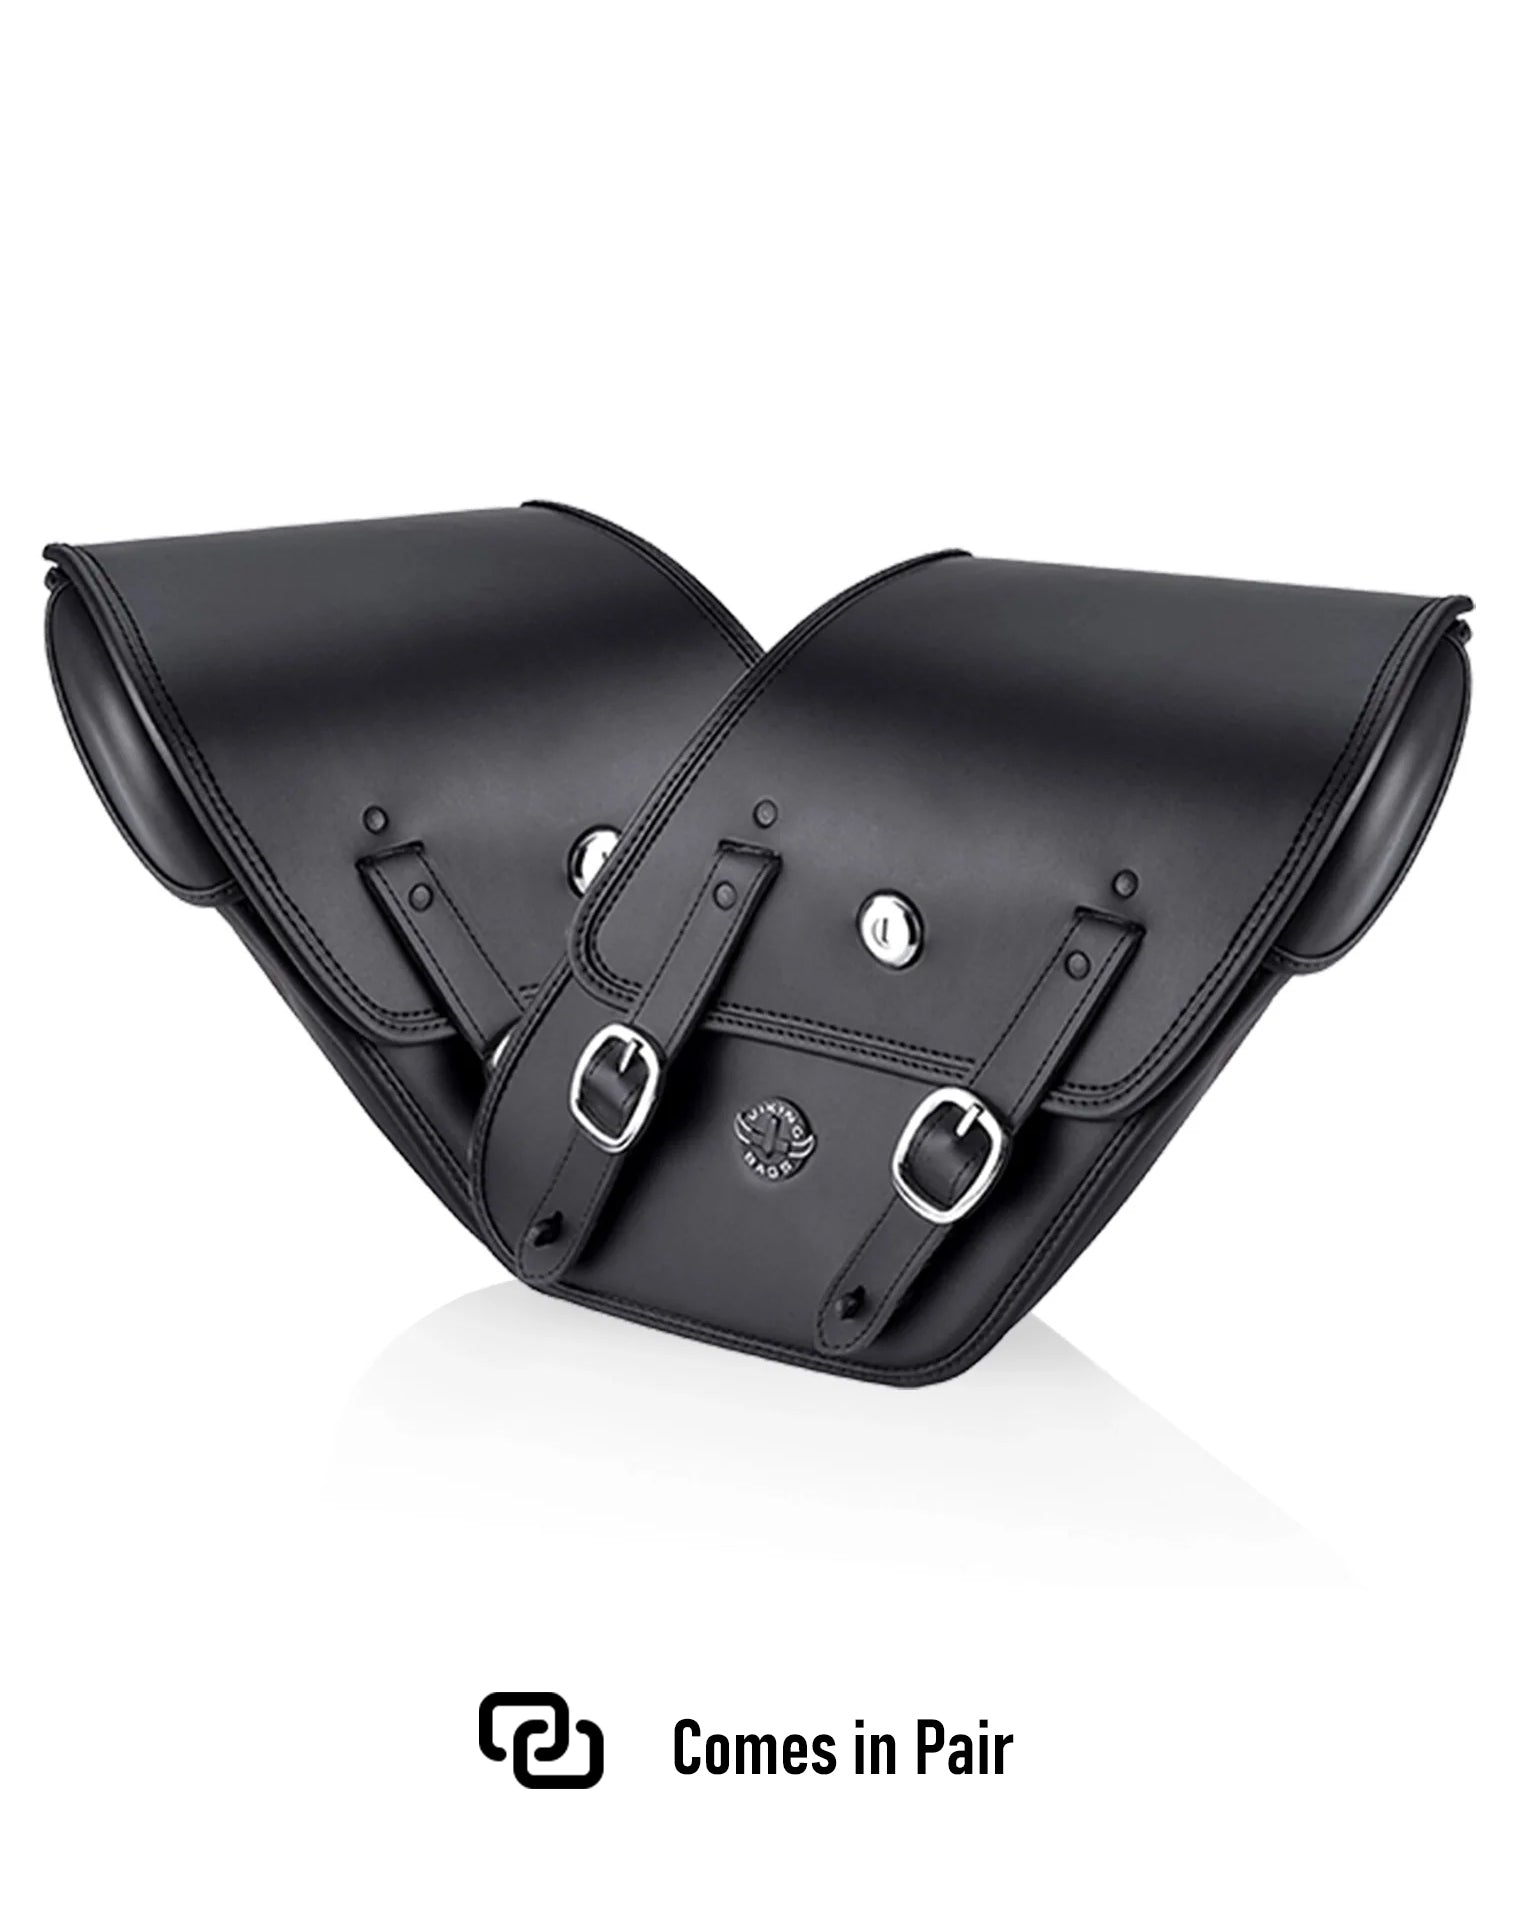 Viking Drifter Large Yamaha Bolt Specific Leather Motorcycle Saddlebags Weather Resistant Bags Comes in Pair